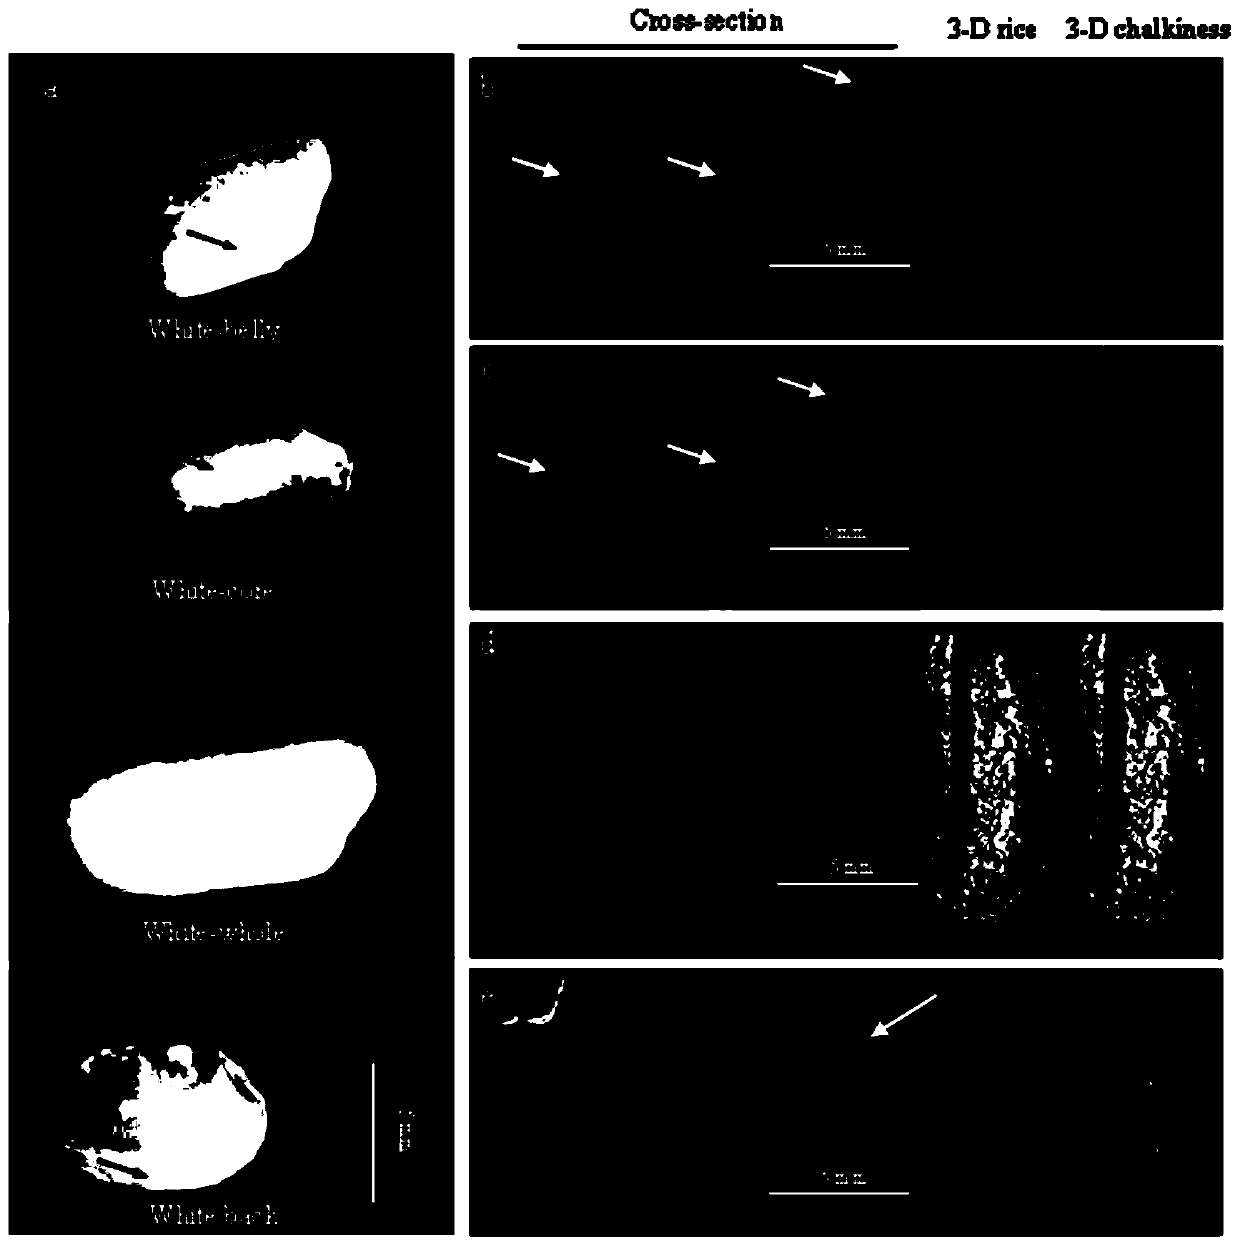 Three-dimensional measurement method for chalkiness of rice based on Micro-CT